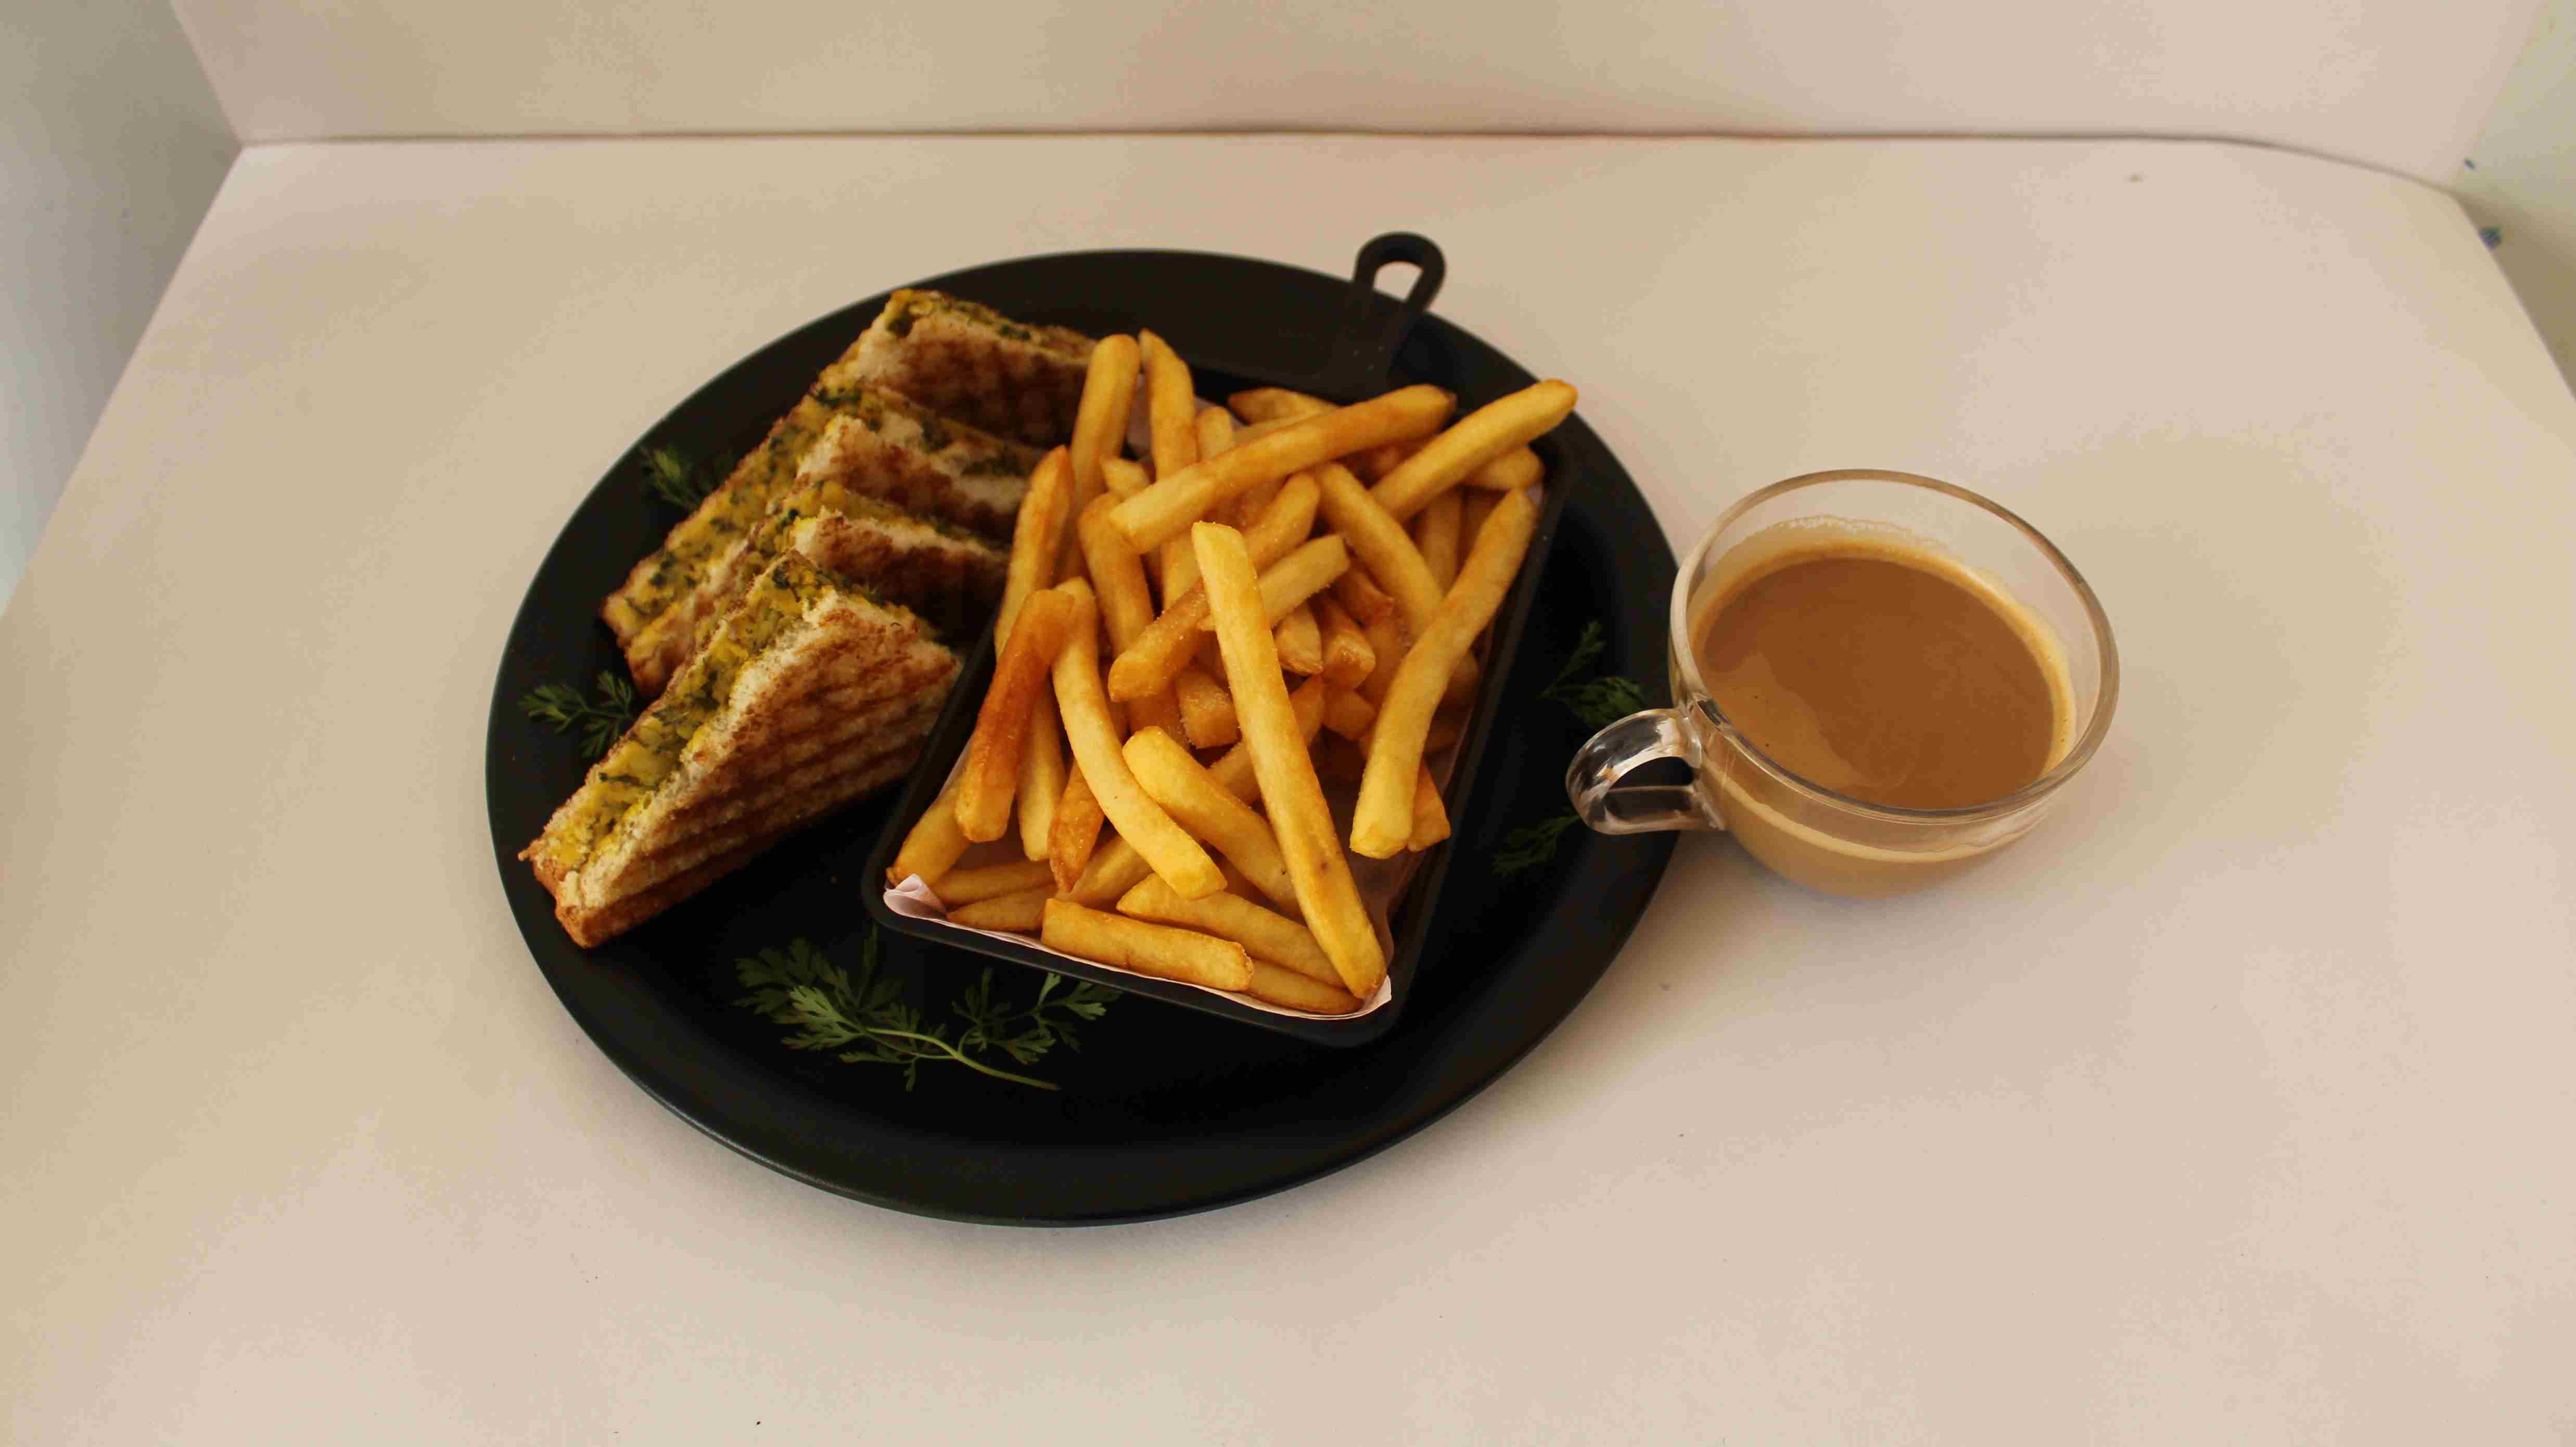 Bombay Sandwich + French Fries + Hot Coffee